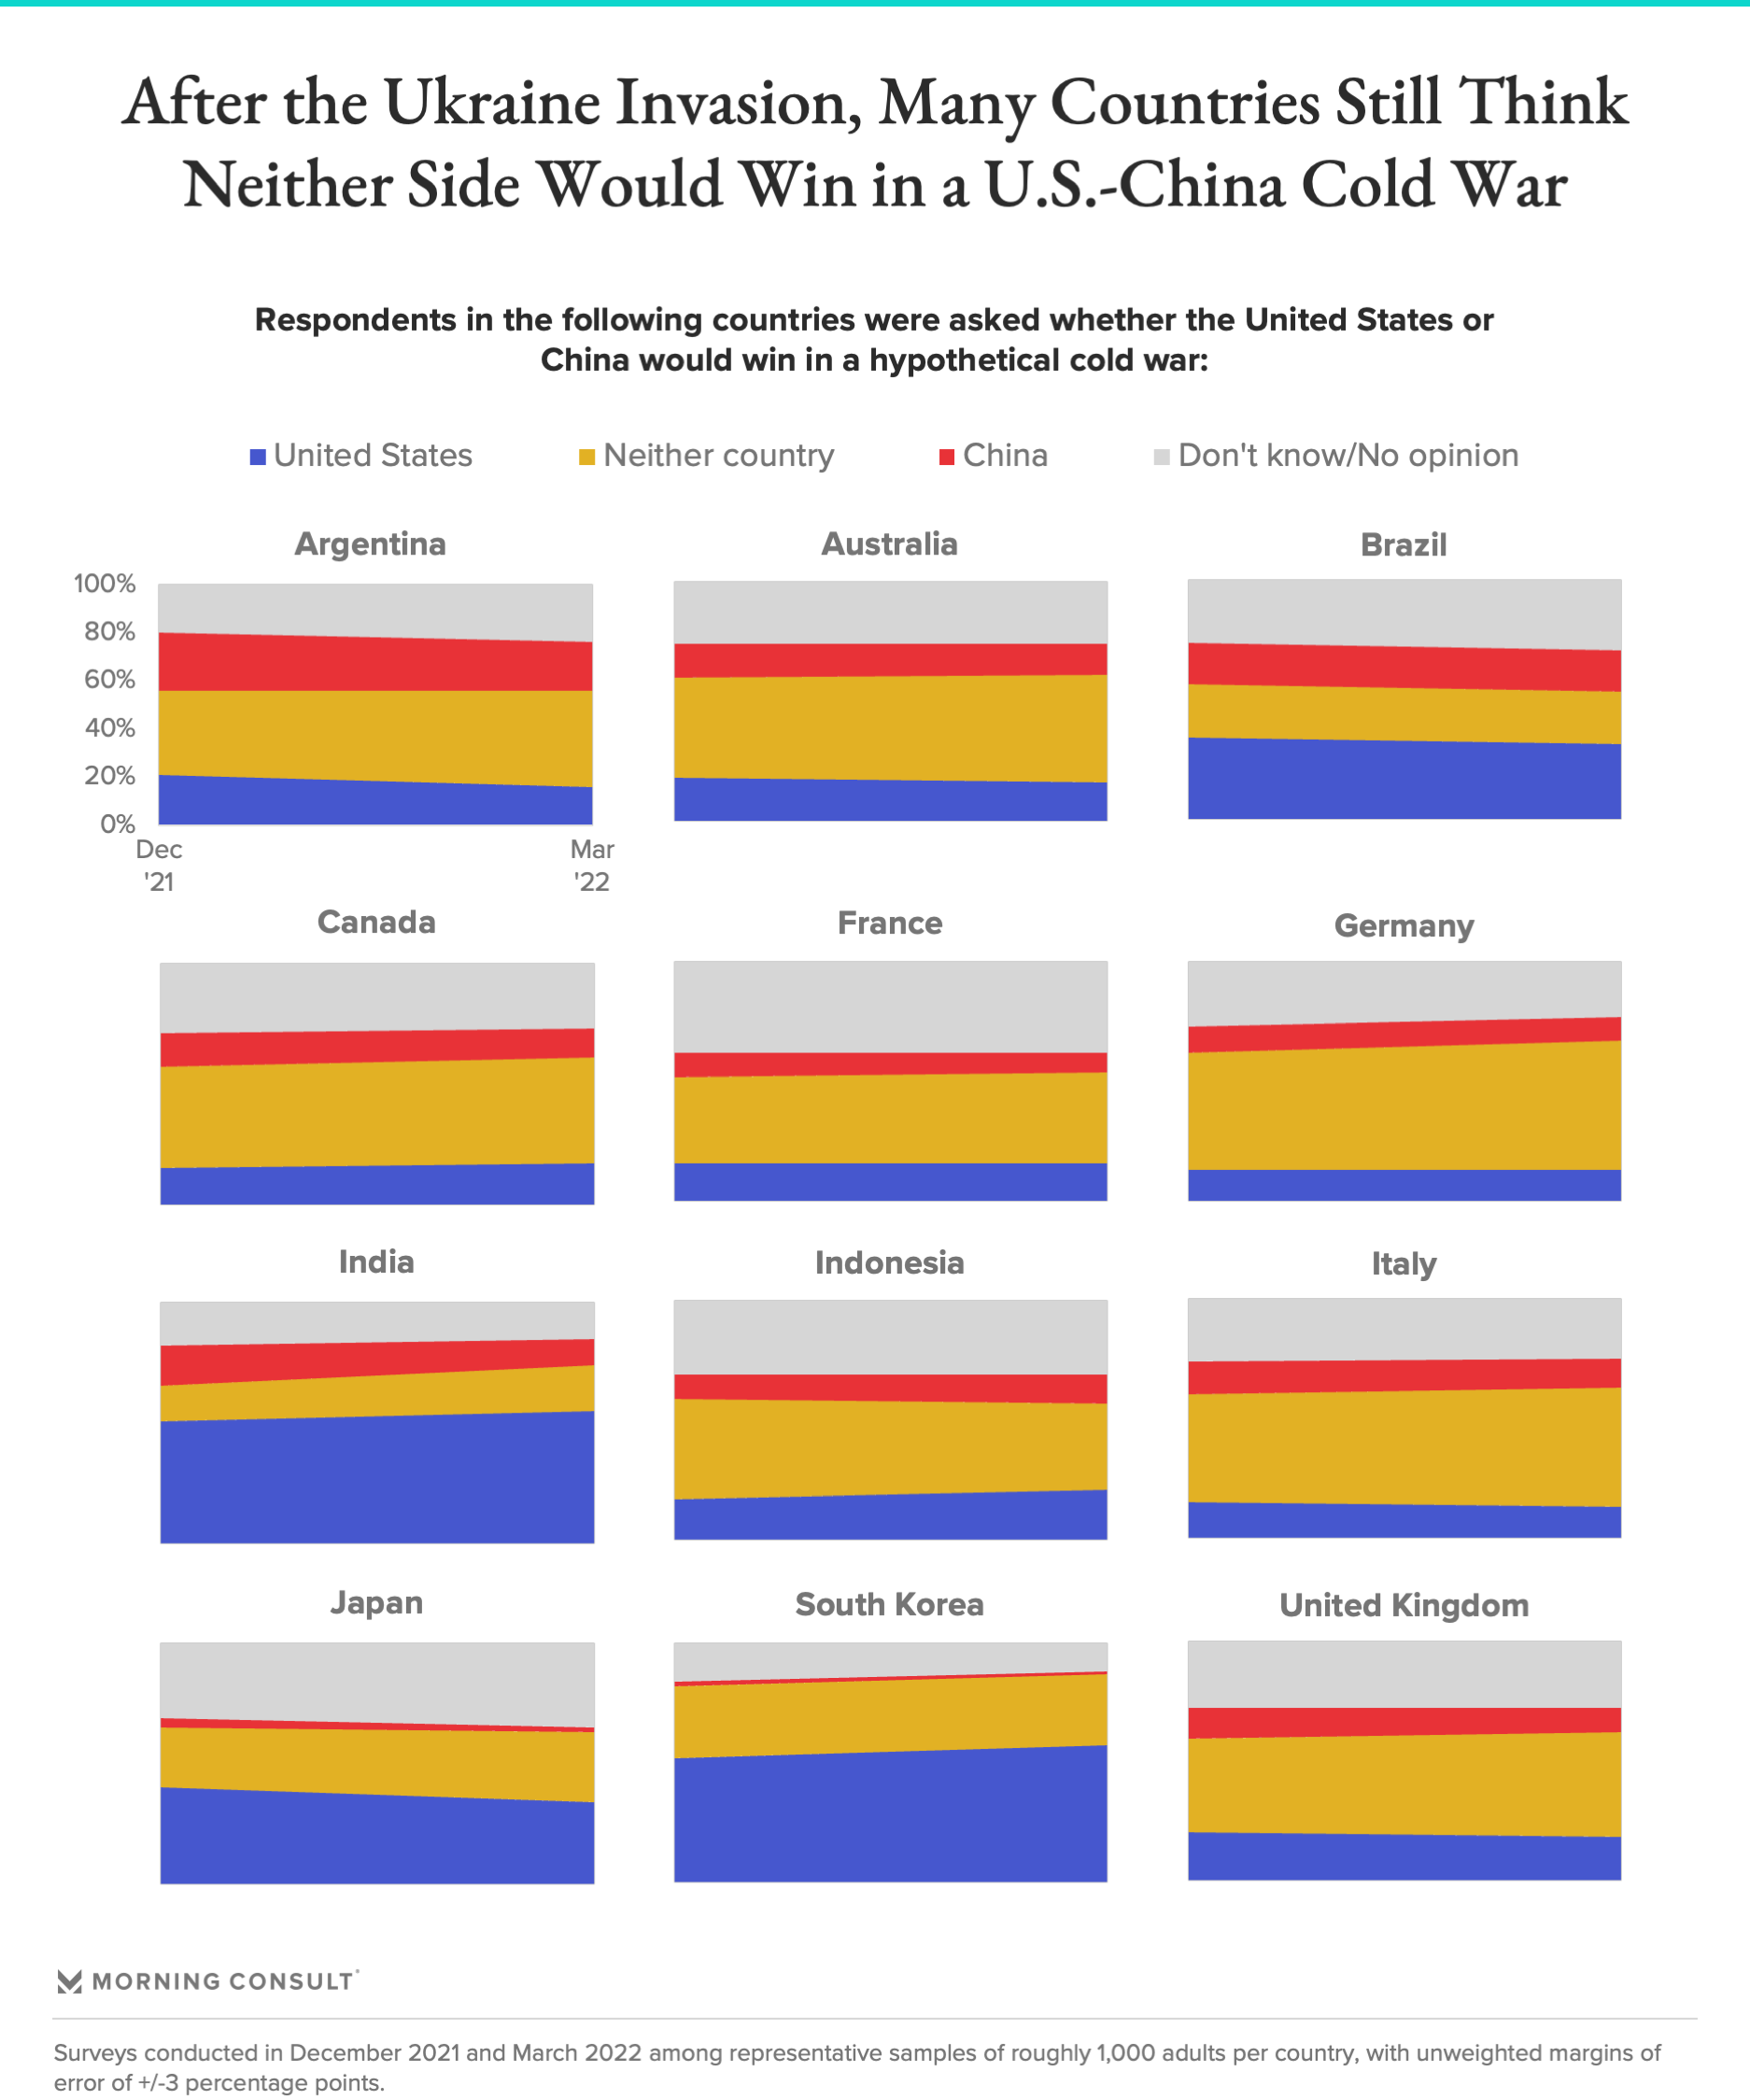 Area charts showing opinions as to who would win in a cold war, U.S. or China, by country